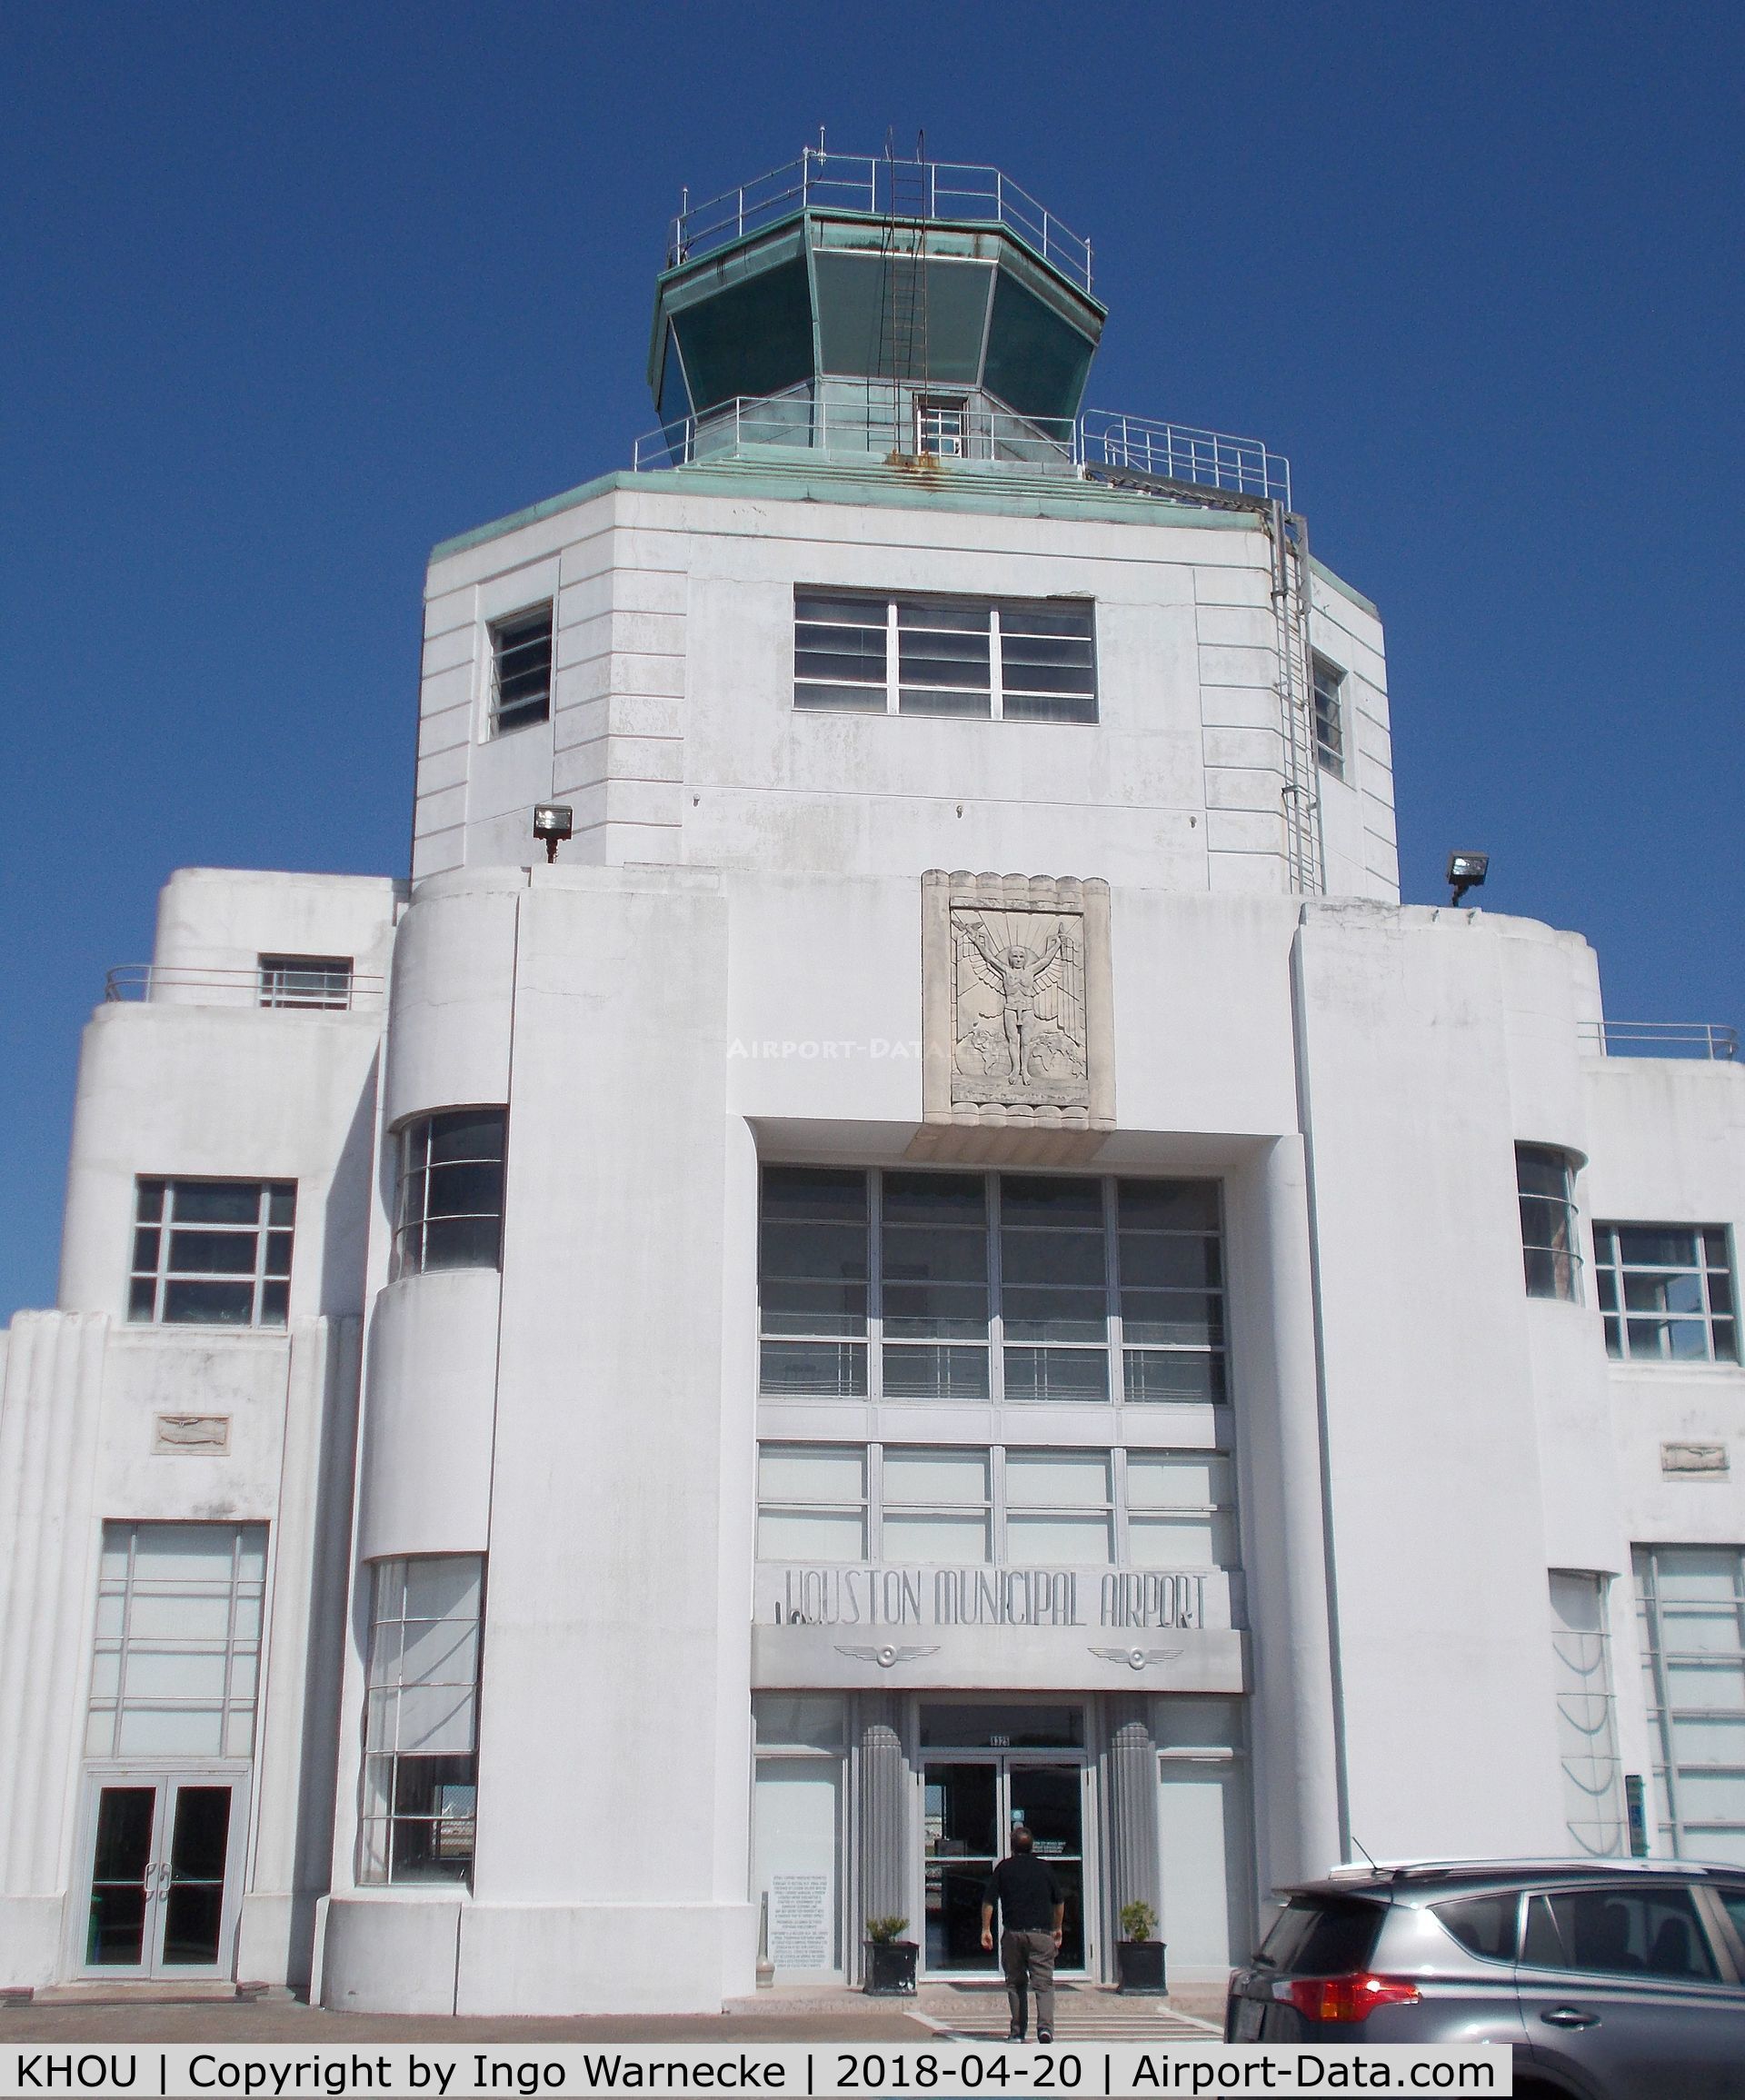 William P Hobby Airport (HOU) - central part of the Houston Municipal Airport terminal building - restored and maintained by volunteers and staff of the 1940 Air Terminal Museum